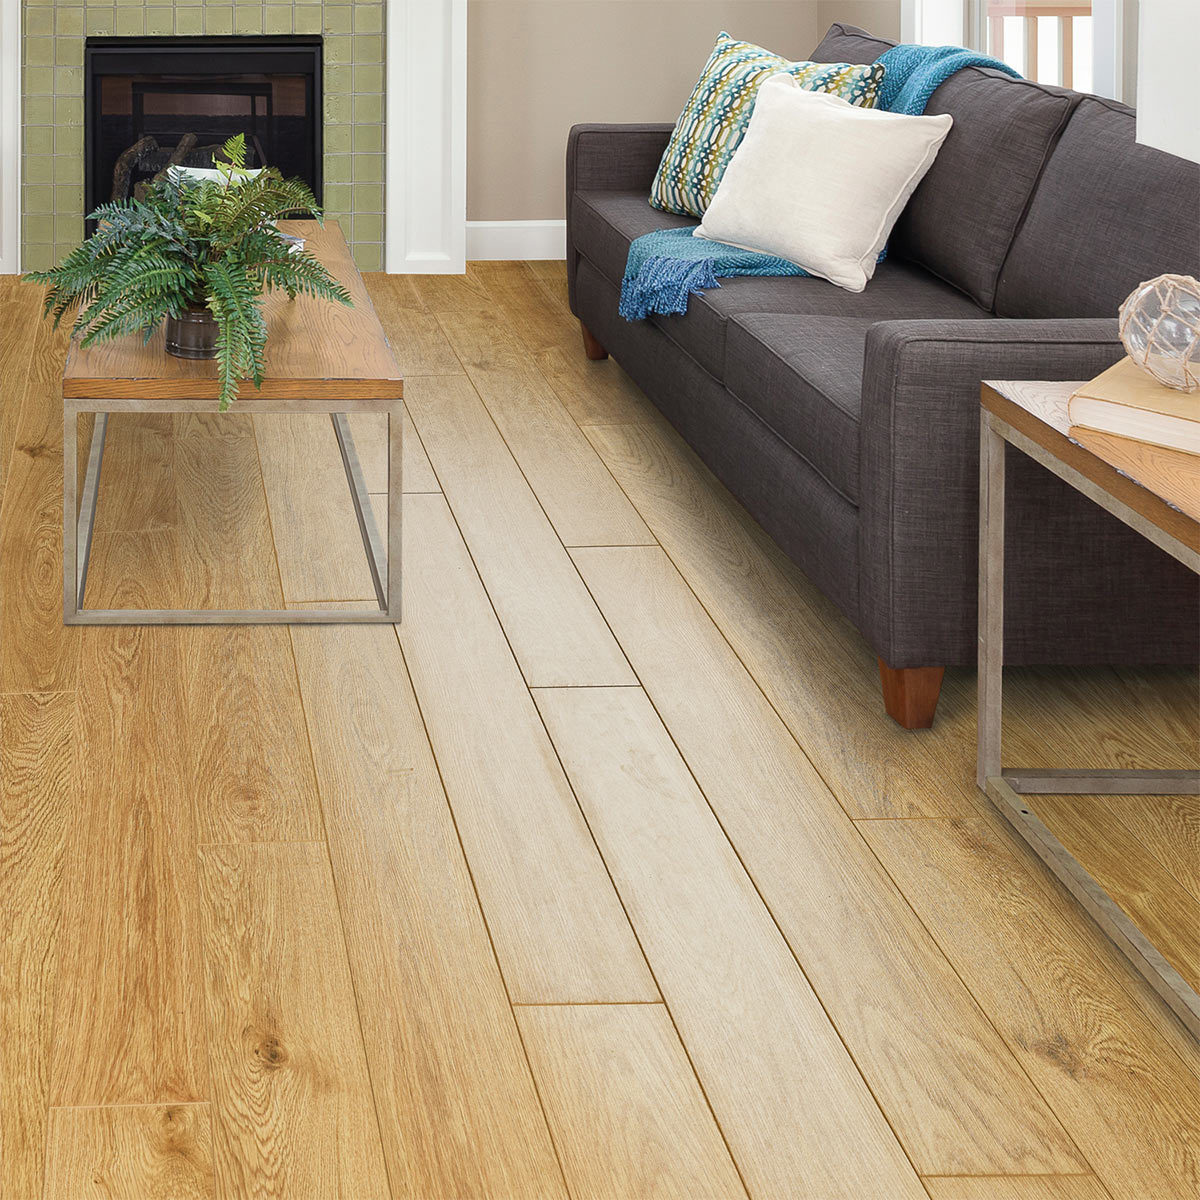 5 Best Laminate Flooring Colours For, How To Choose Laminate Flooring Colour